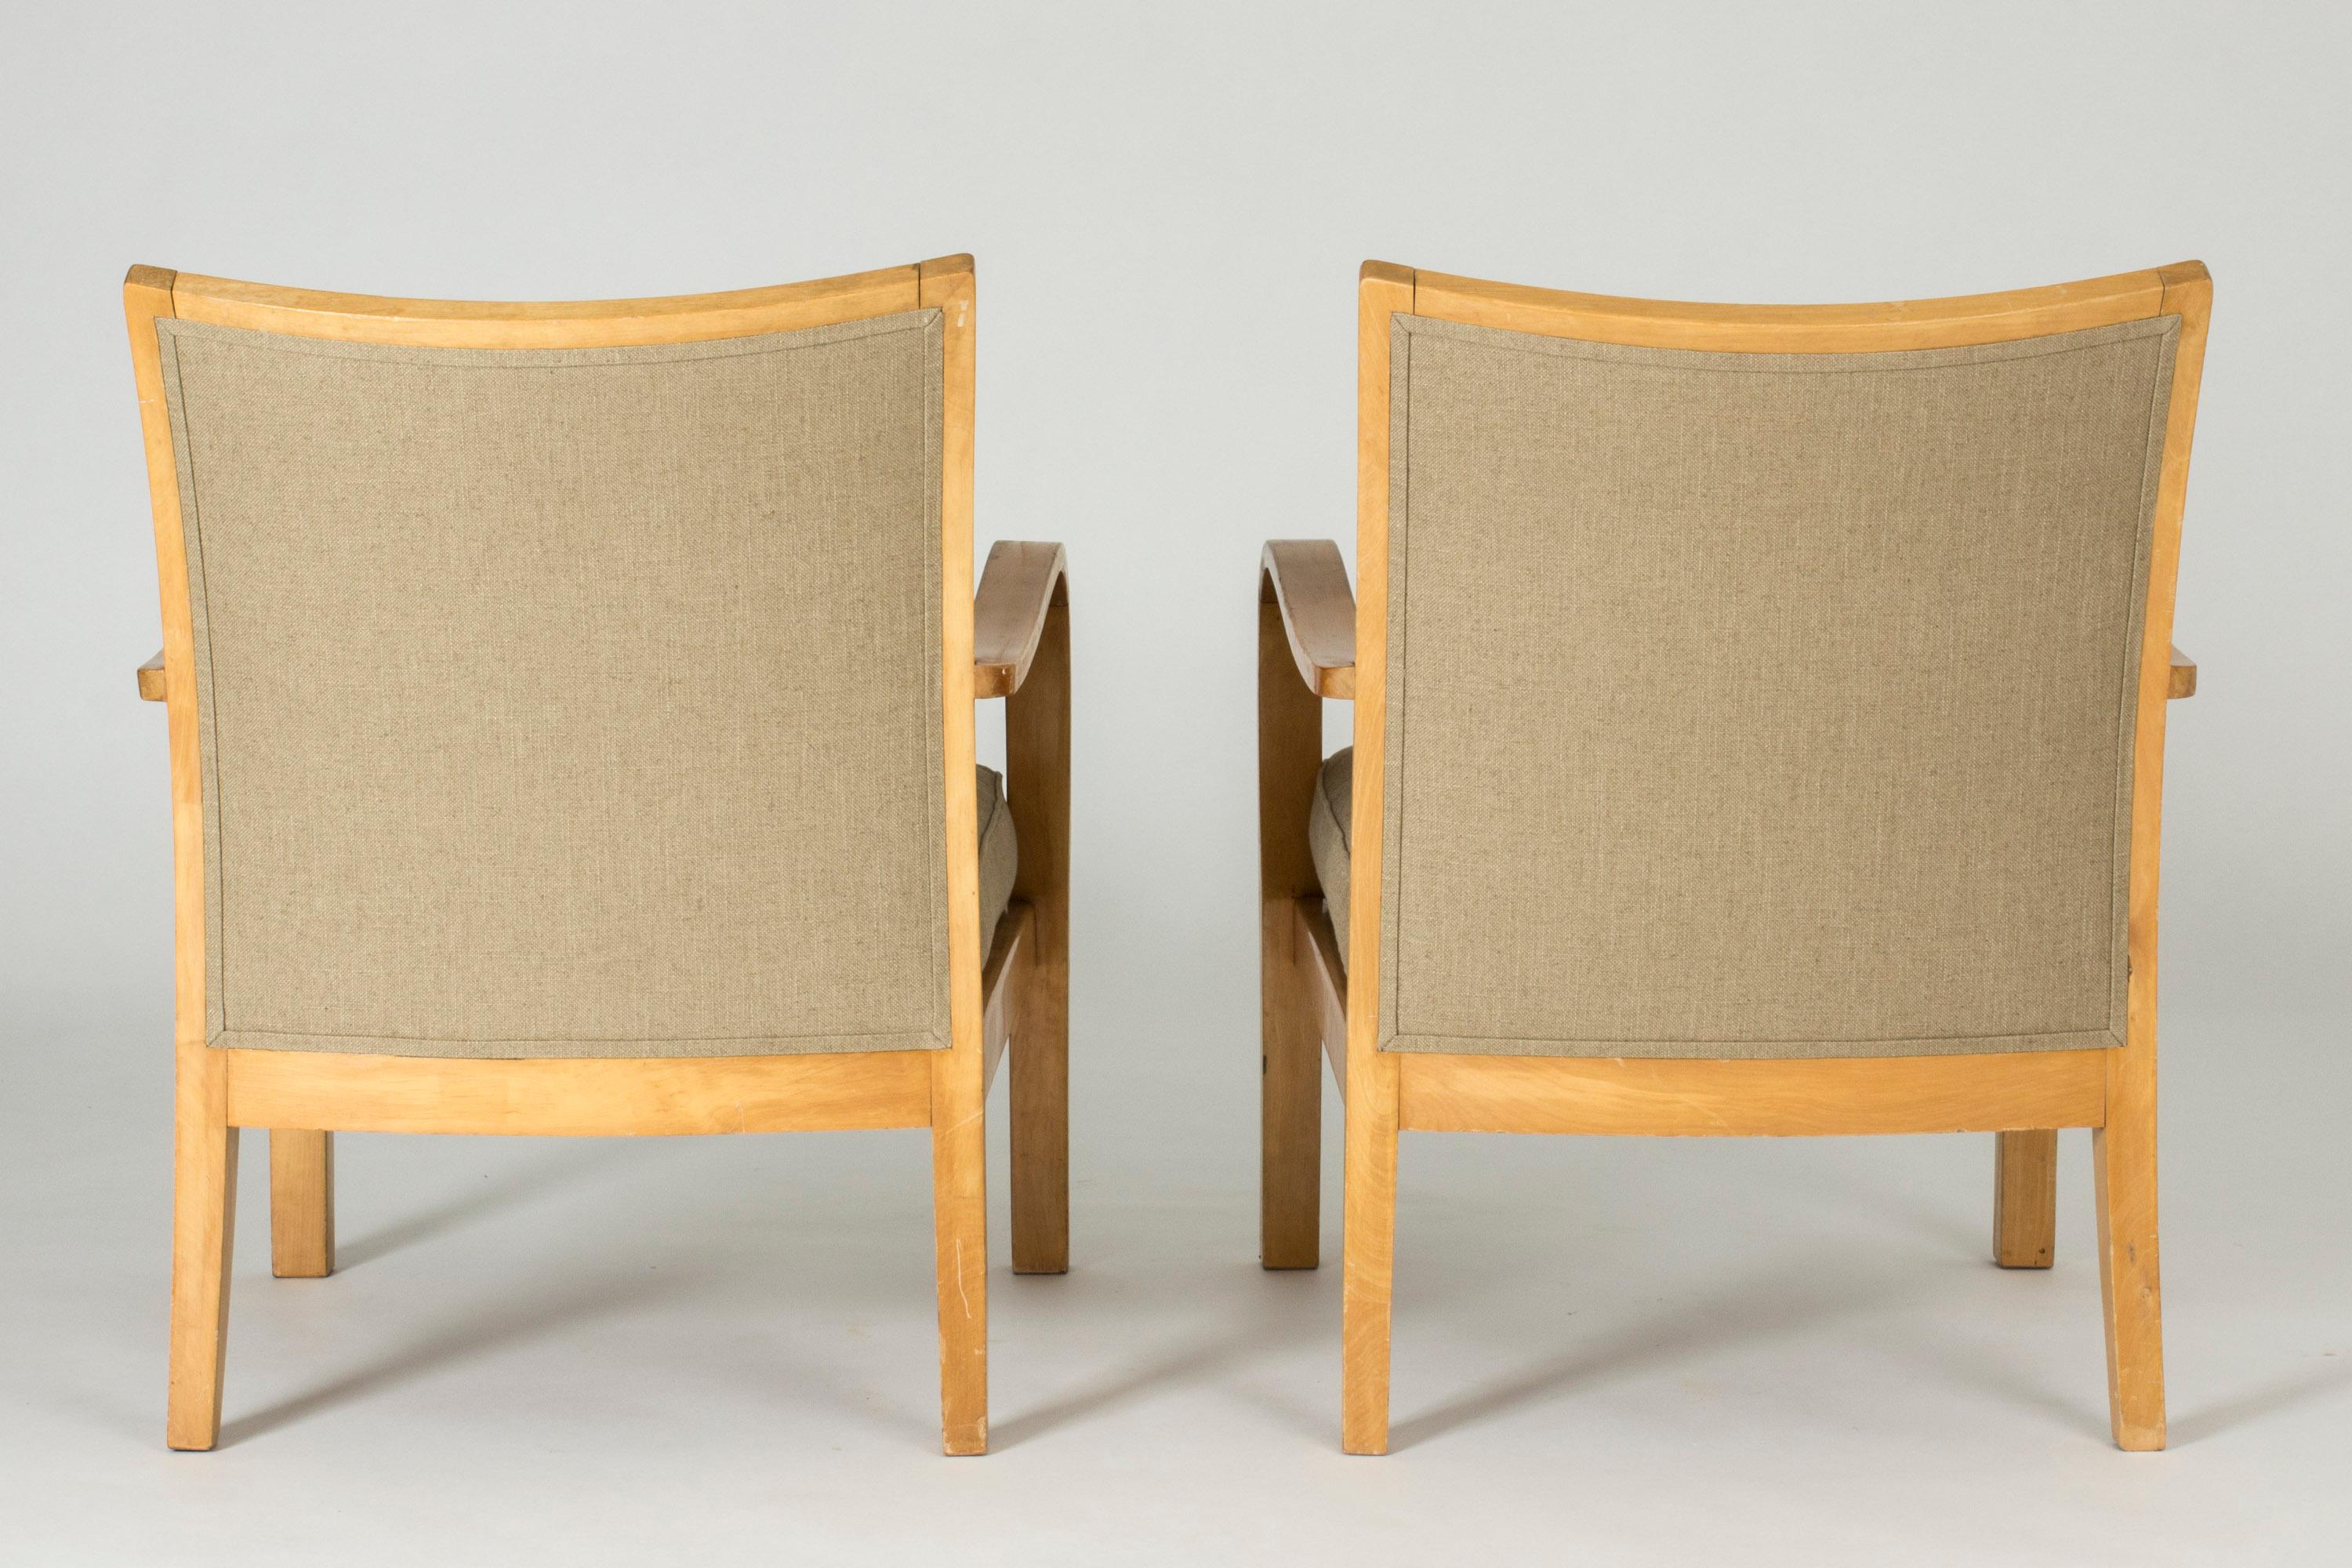 Pair of Functionalist Birch and Linen Lounge Chairs by Axel Larsson for Bodafors In Good Condition For Sale In Stockholm, SE